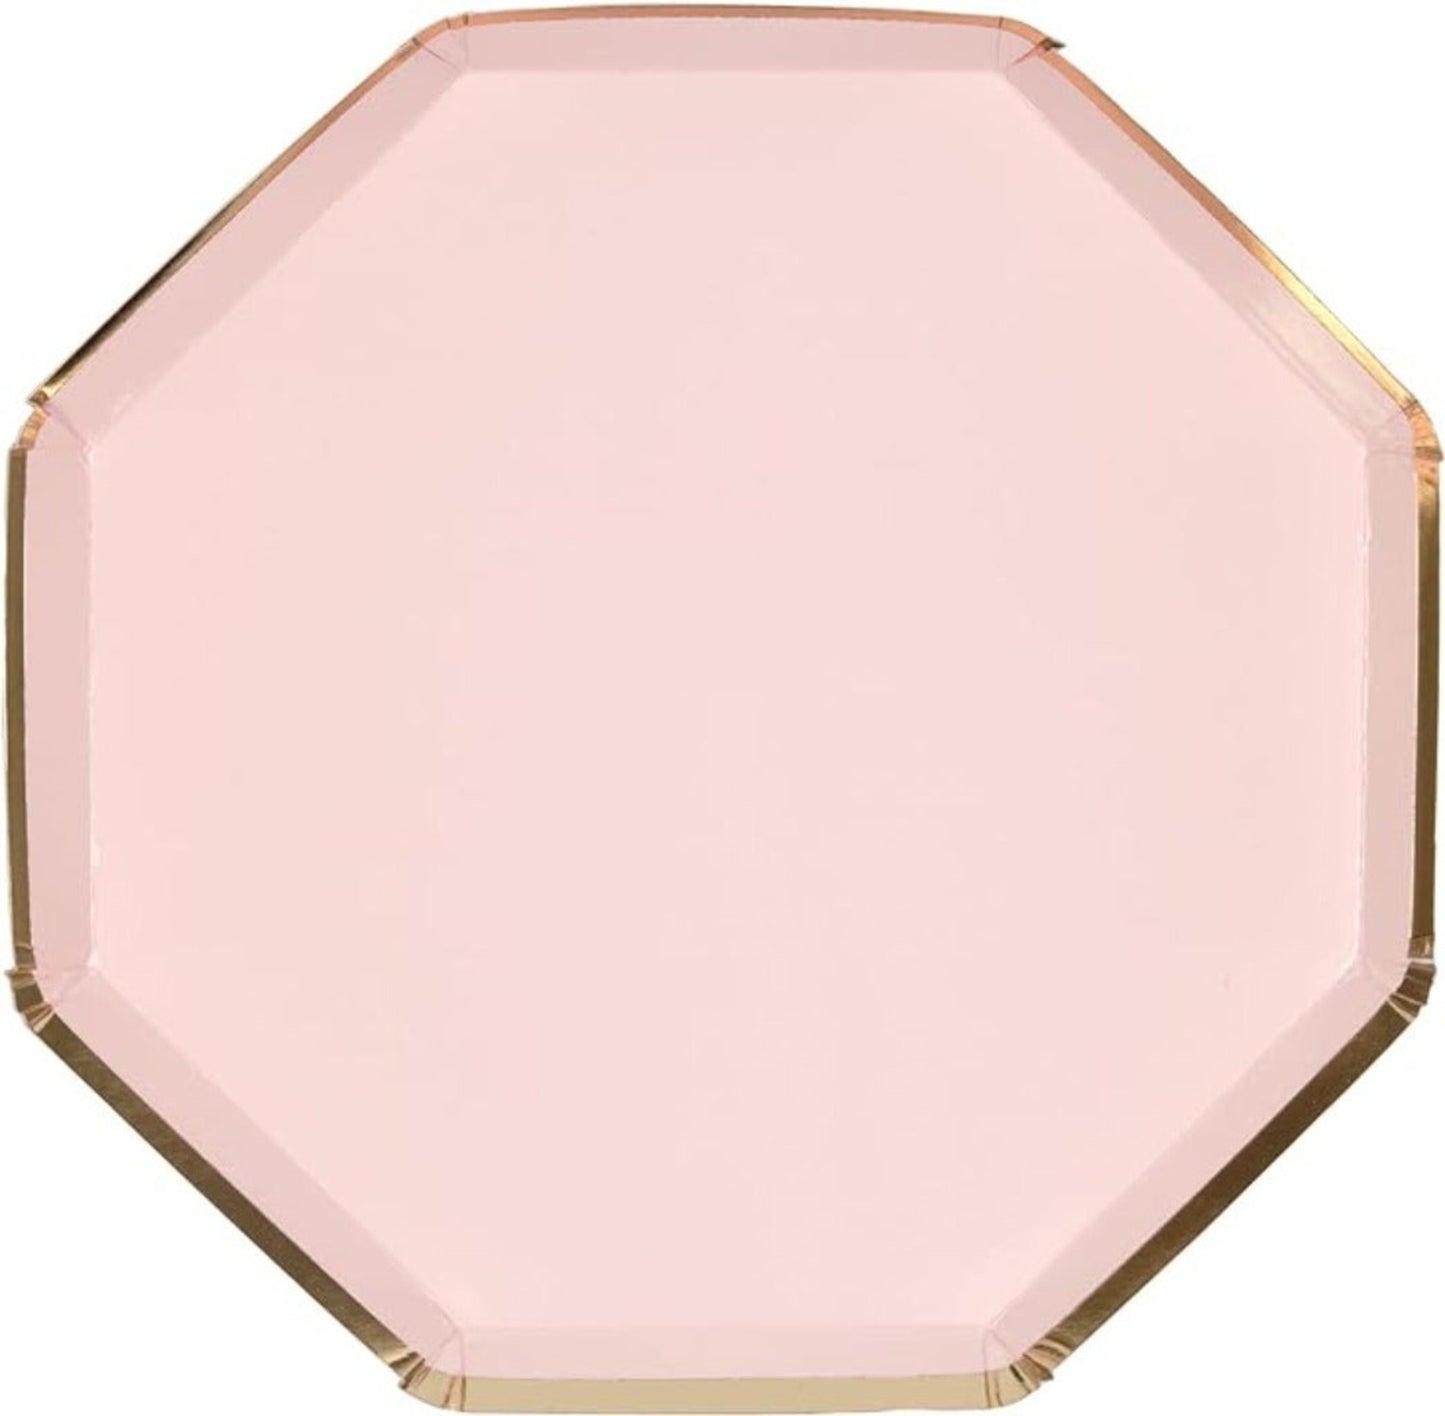 Dusty Pink Coctail Plates